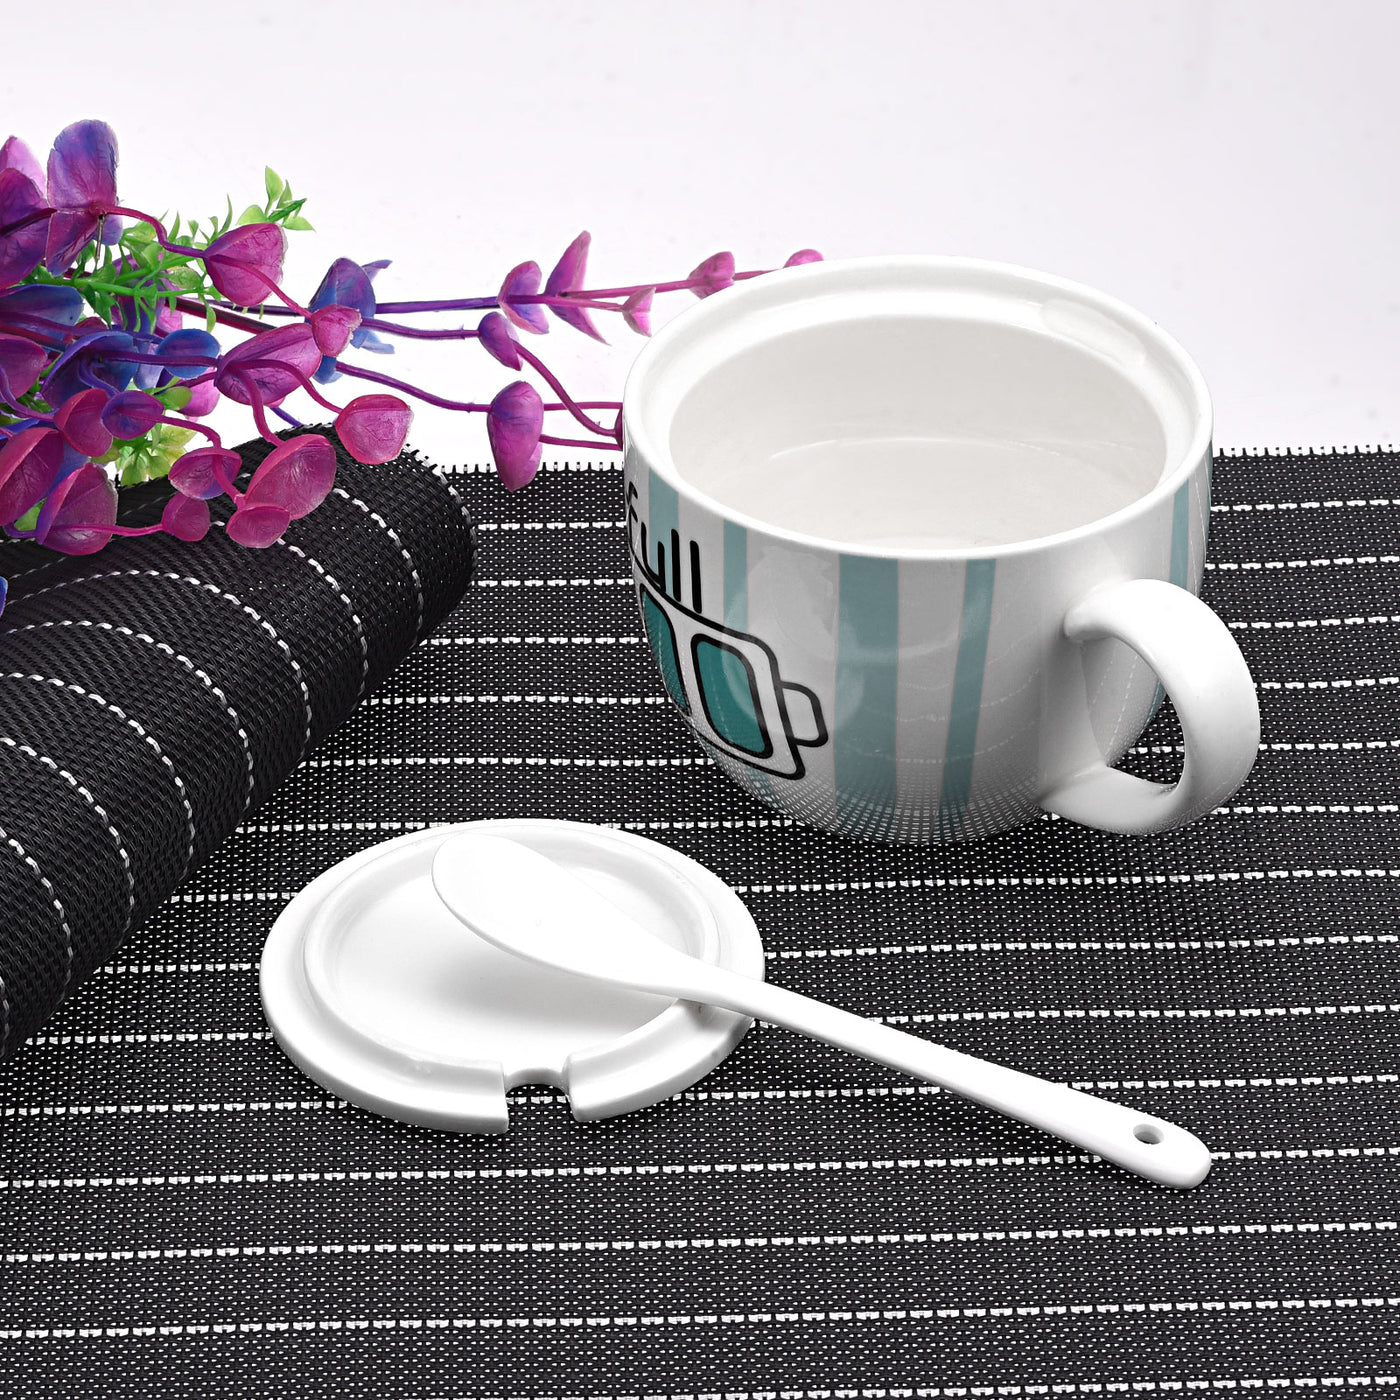 uxcell Uxcell Place Mats, 450x300mm Table Mats Set of 4 PVC Washable Woven Placemat Black